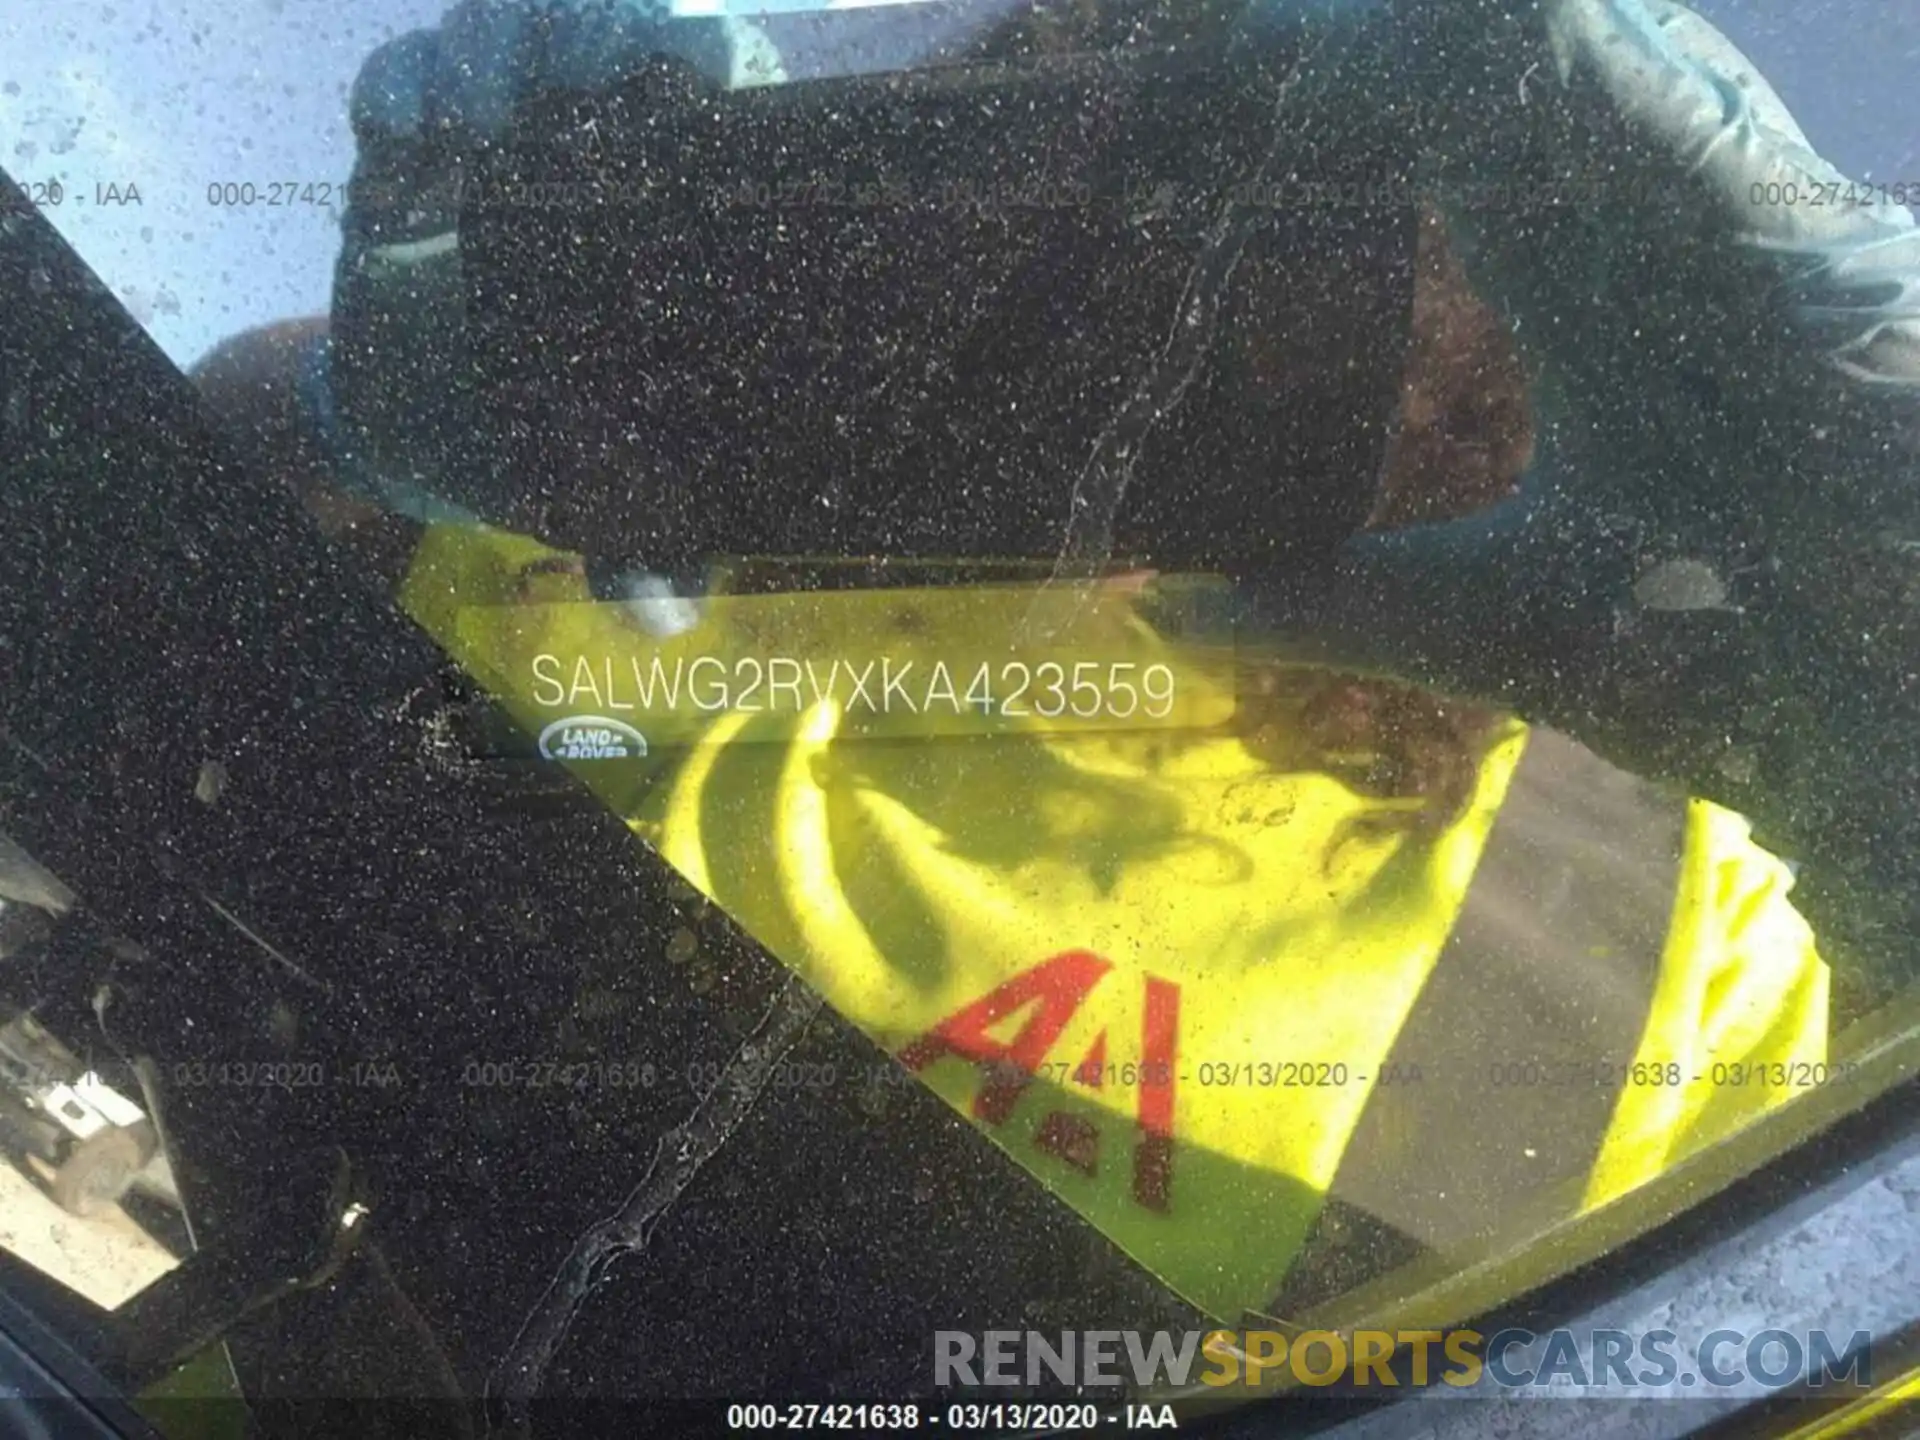 9 Photograph of a damaged car SALWG2RVXKA423559 LAND ROVER RANGE ROVER SPORT 2019